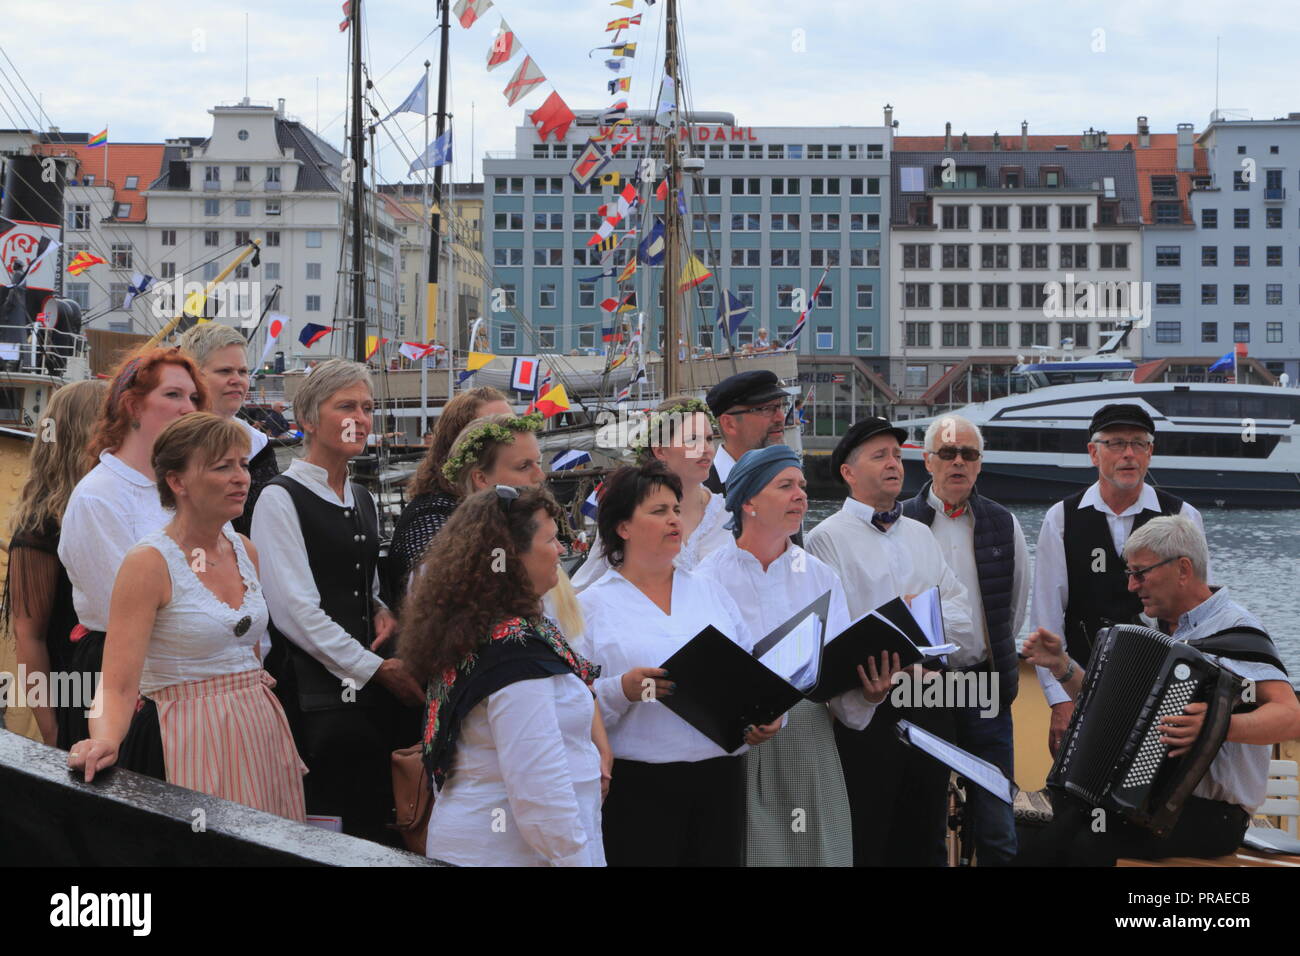 A choir sings traditional Norwegian songs on the deck of a boat in Bergen harbour, Norway, during the Market Day (Torgdagen). Stock Photo